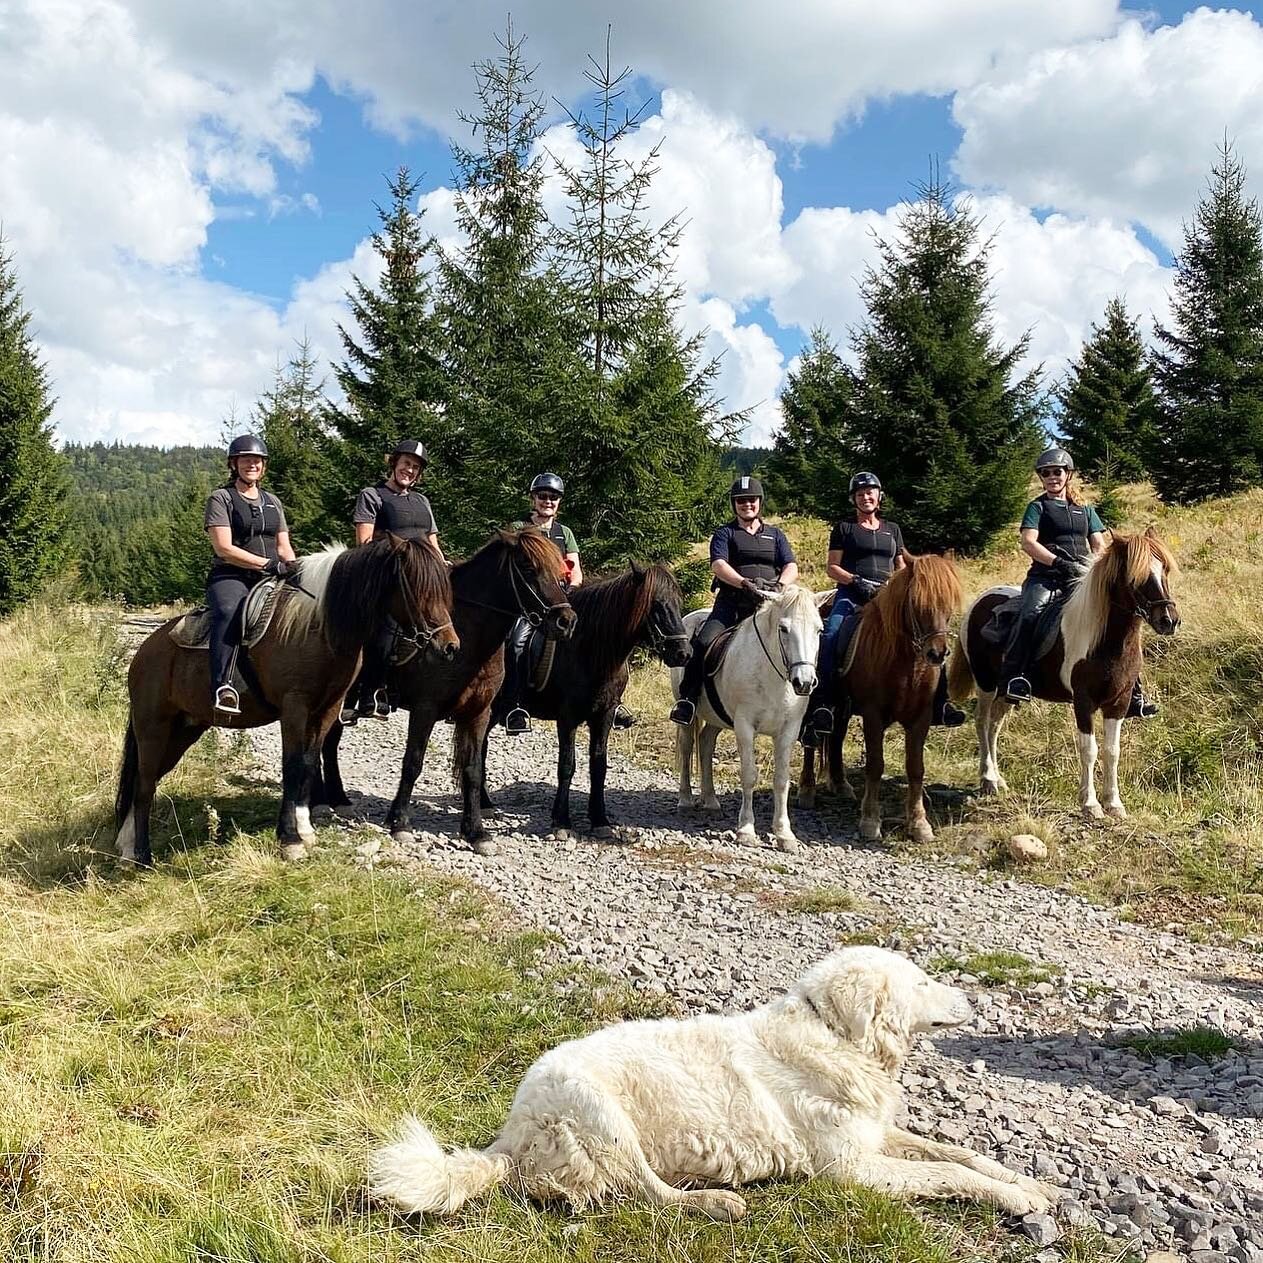 We are happy to share the trails with riders from Norway and the Netherlands! 🥰 

#islandpferd #islandpferde #icelandichorse #icelandichorses #icelandichorsesofinstagram #horsebackriding #horse #horselover #horsebackrider #transylvania #romania #har